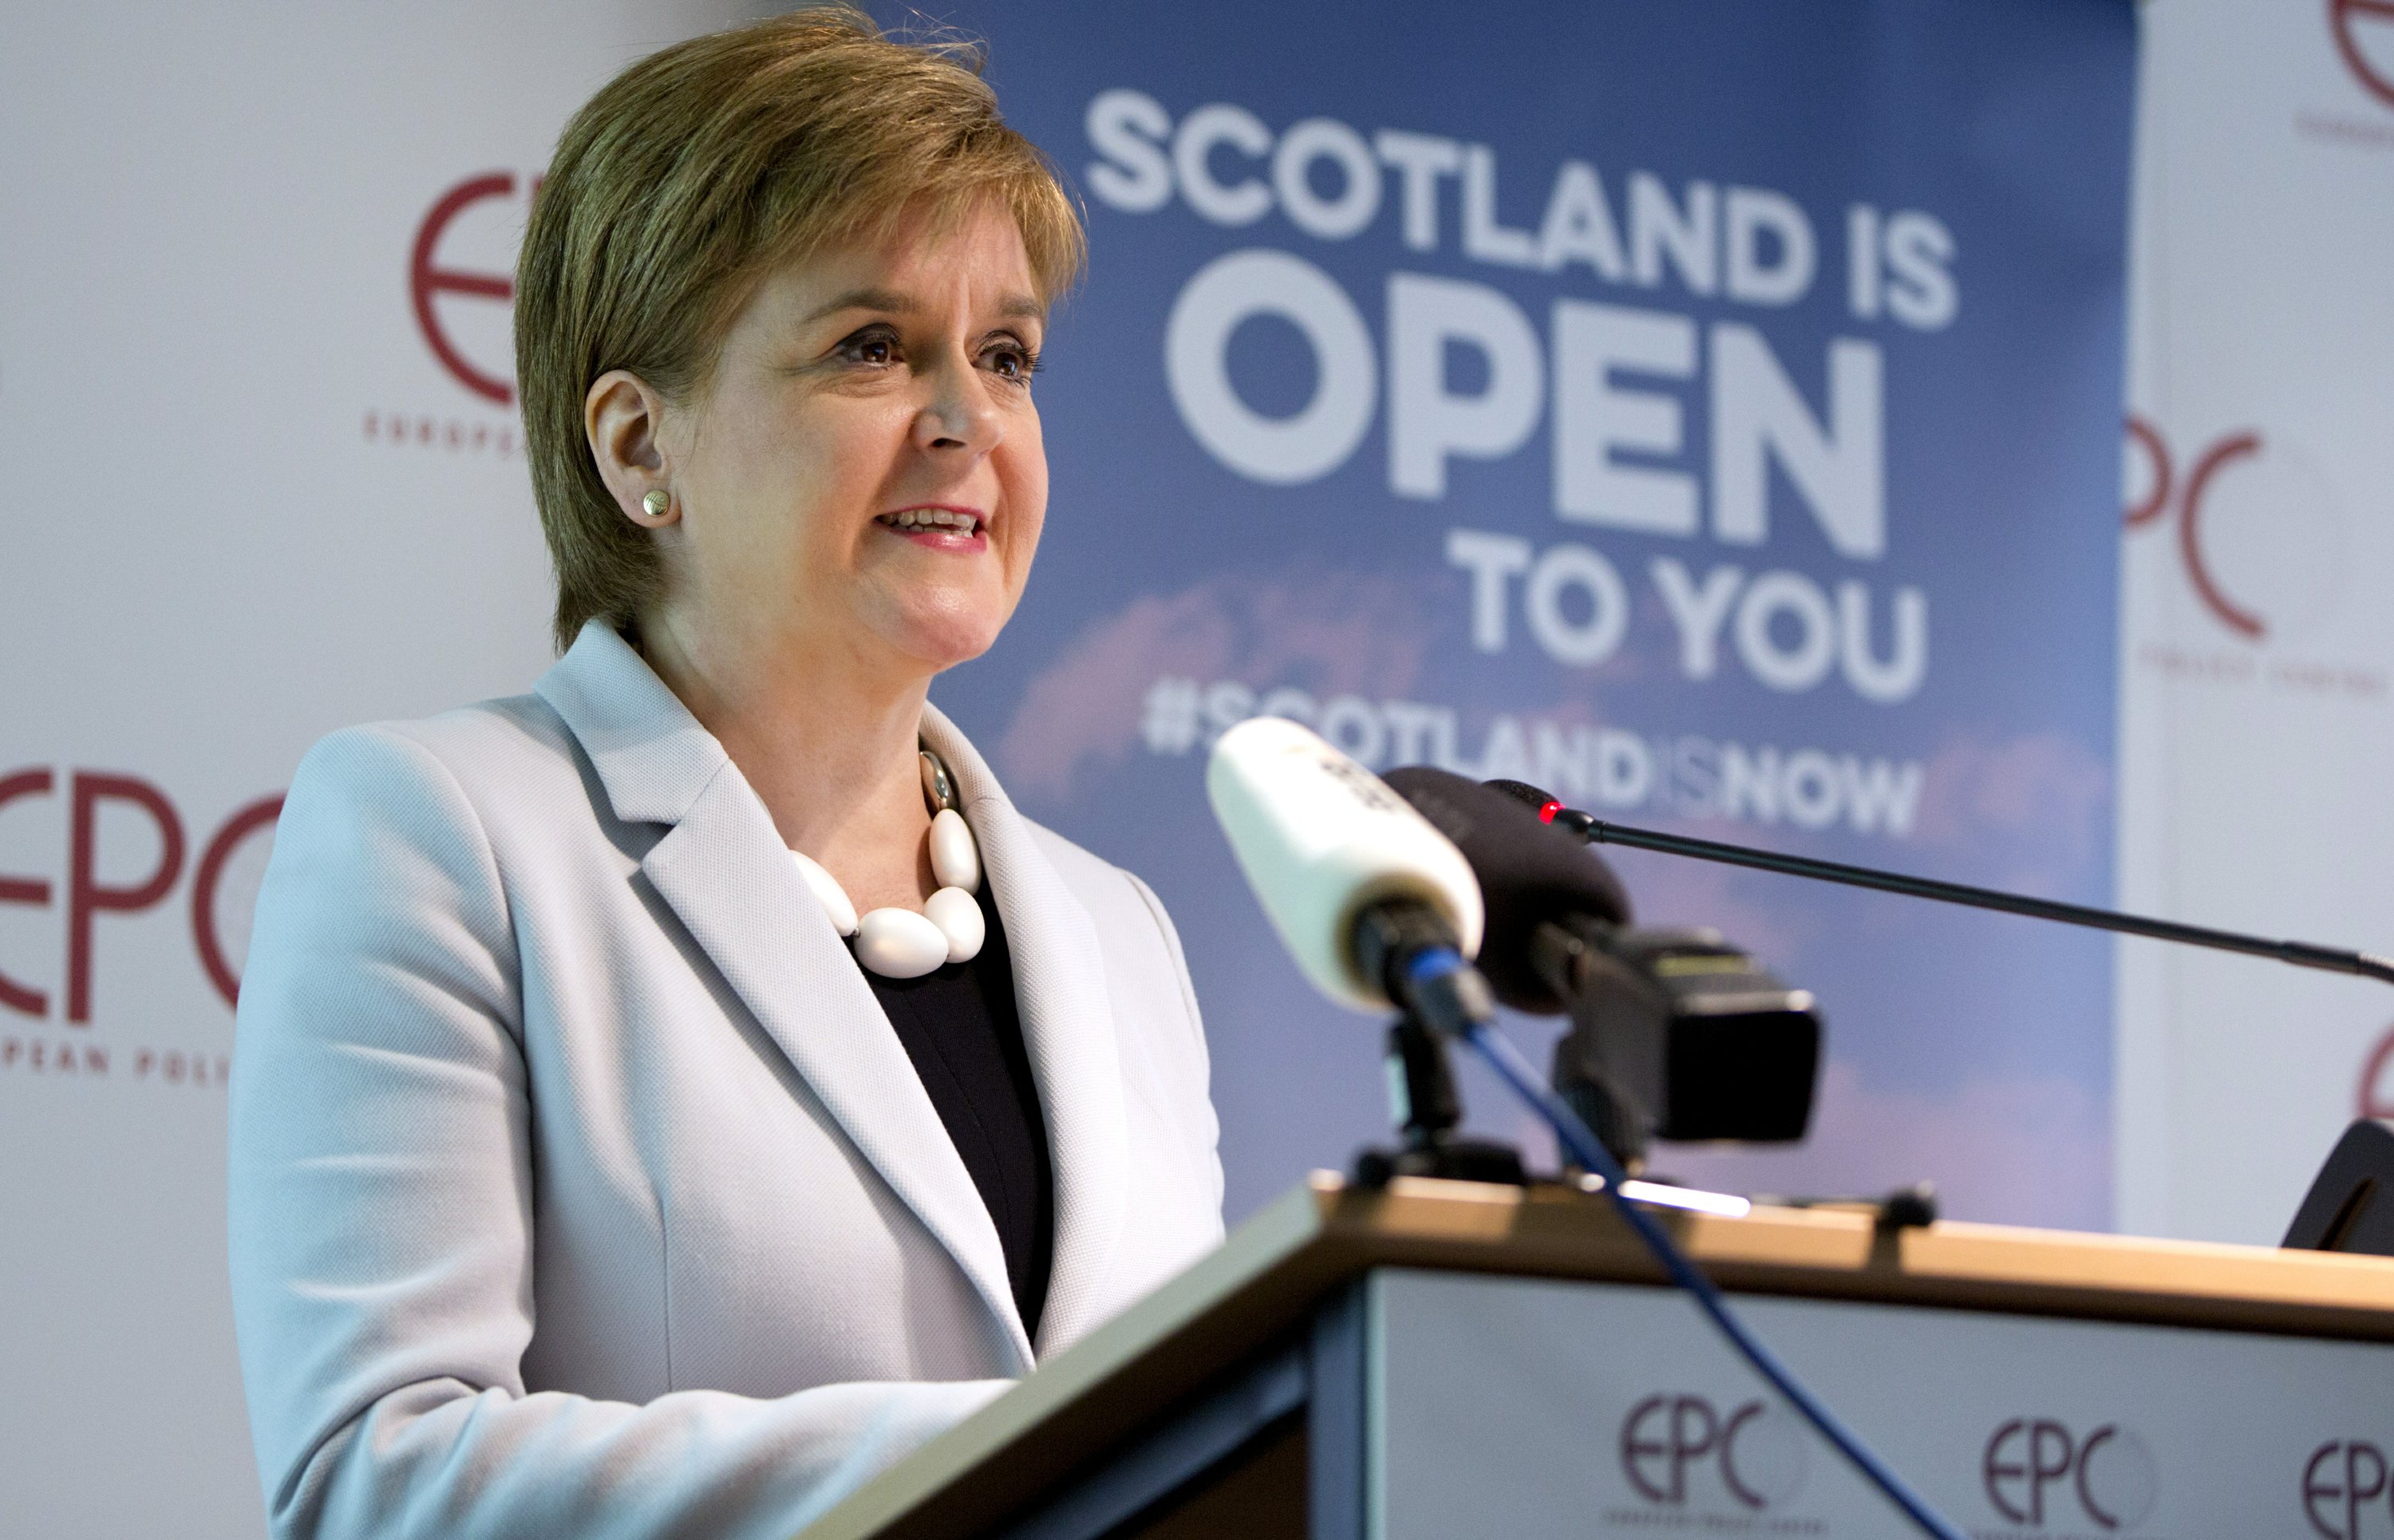 Scottish leader: Brexit signals need to chart future path